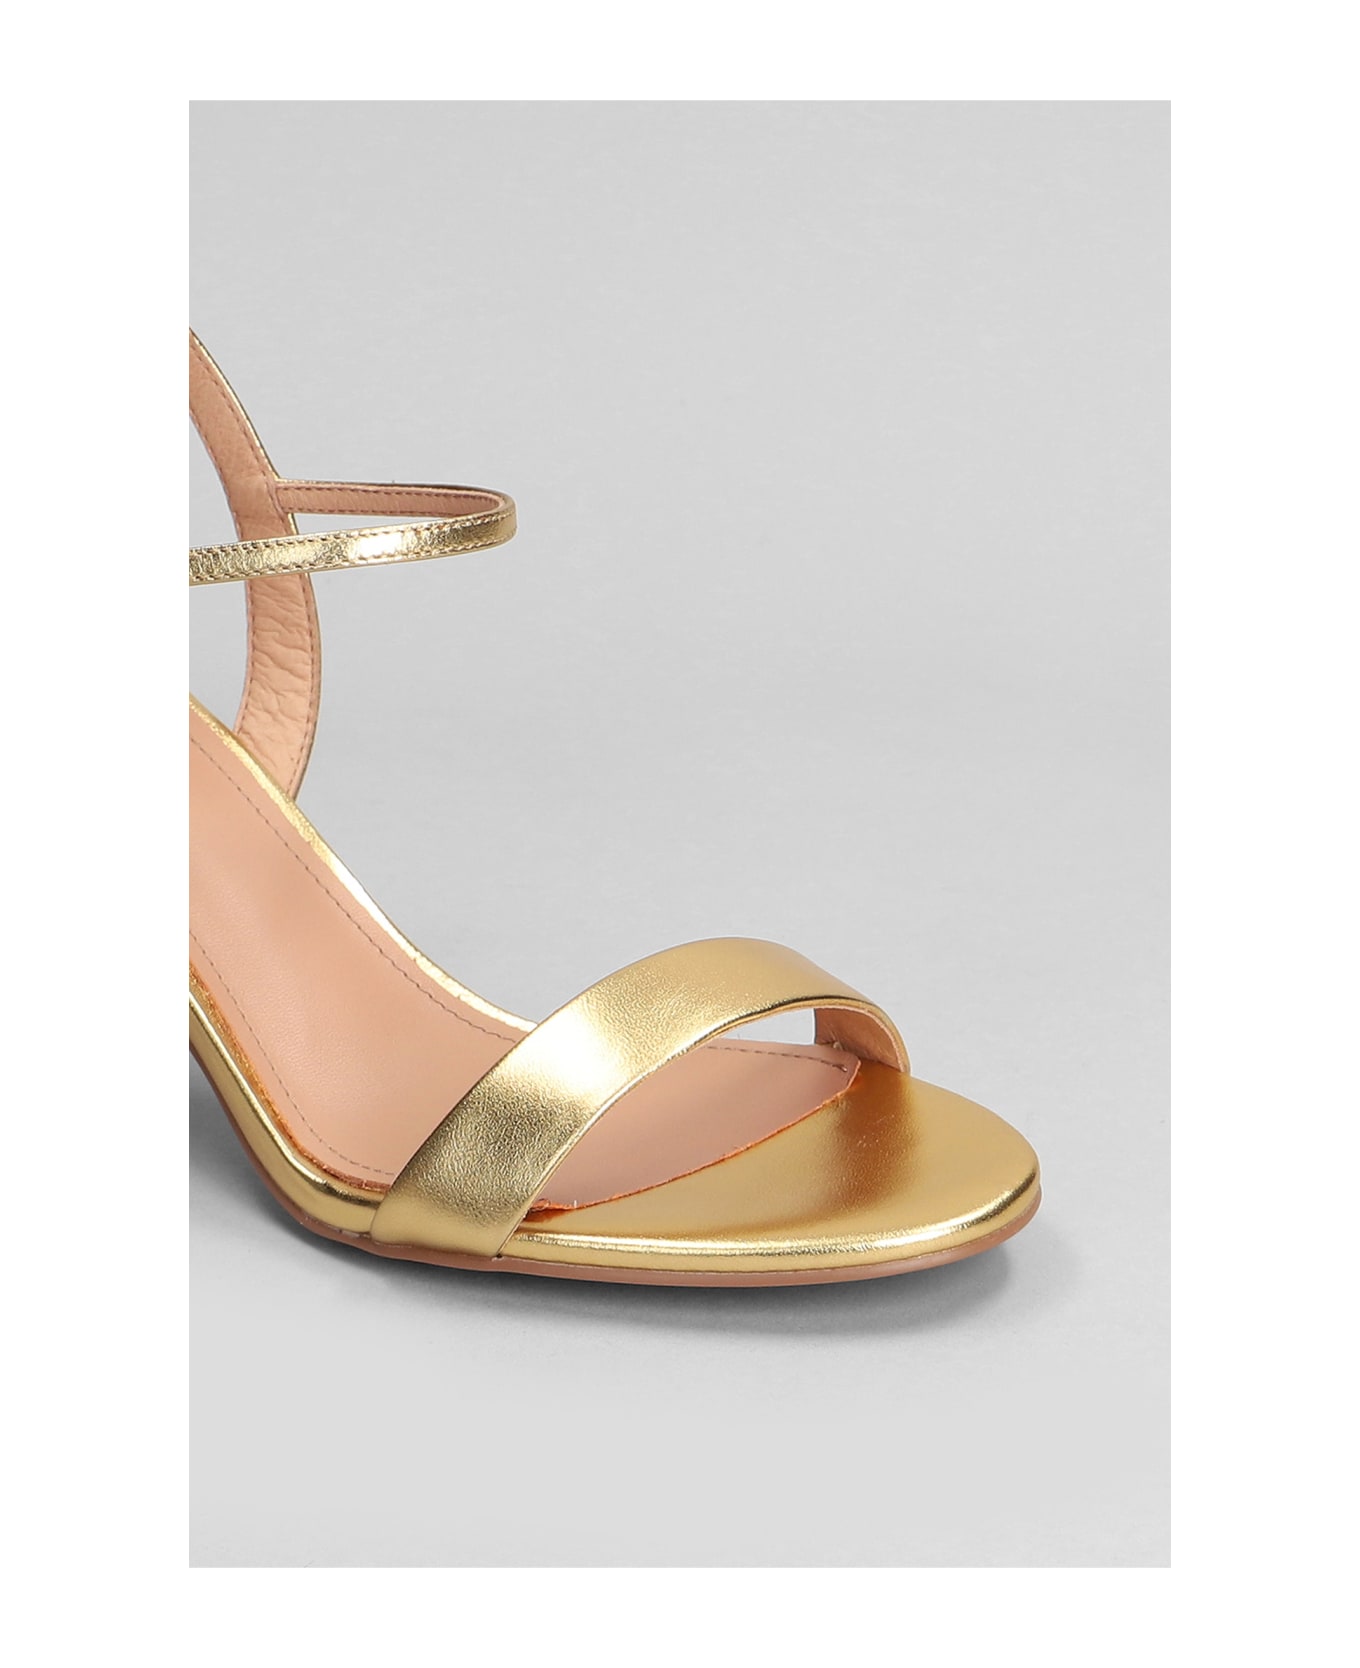 Bibi Lou Lotus 65 Sandals In Gold Leather - gold